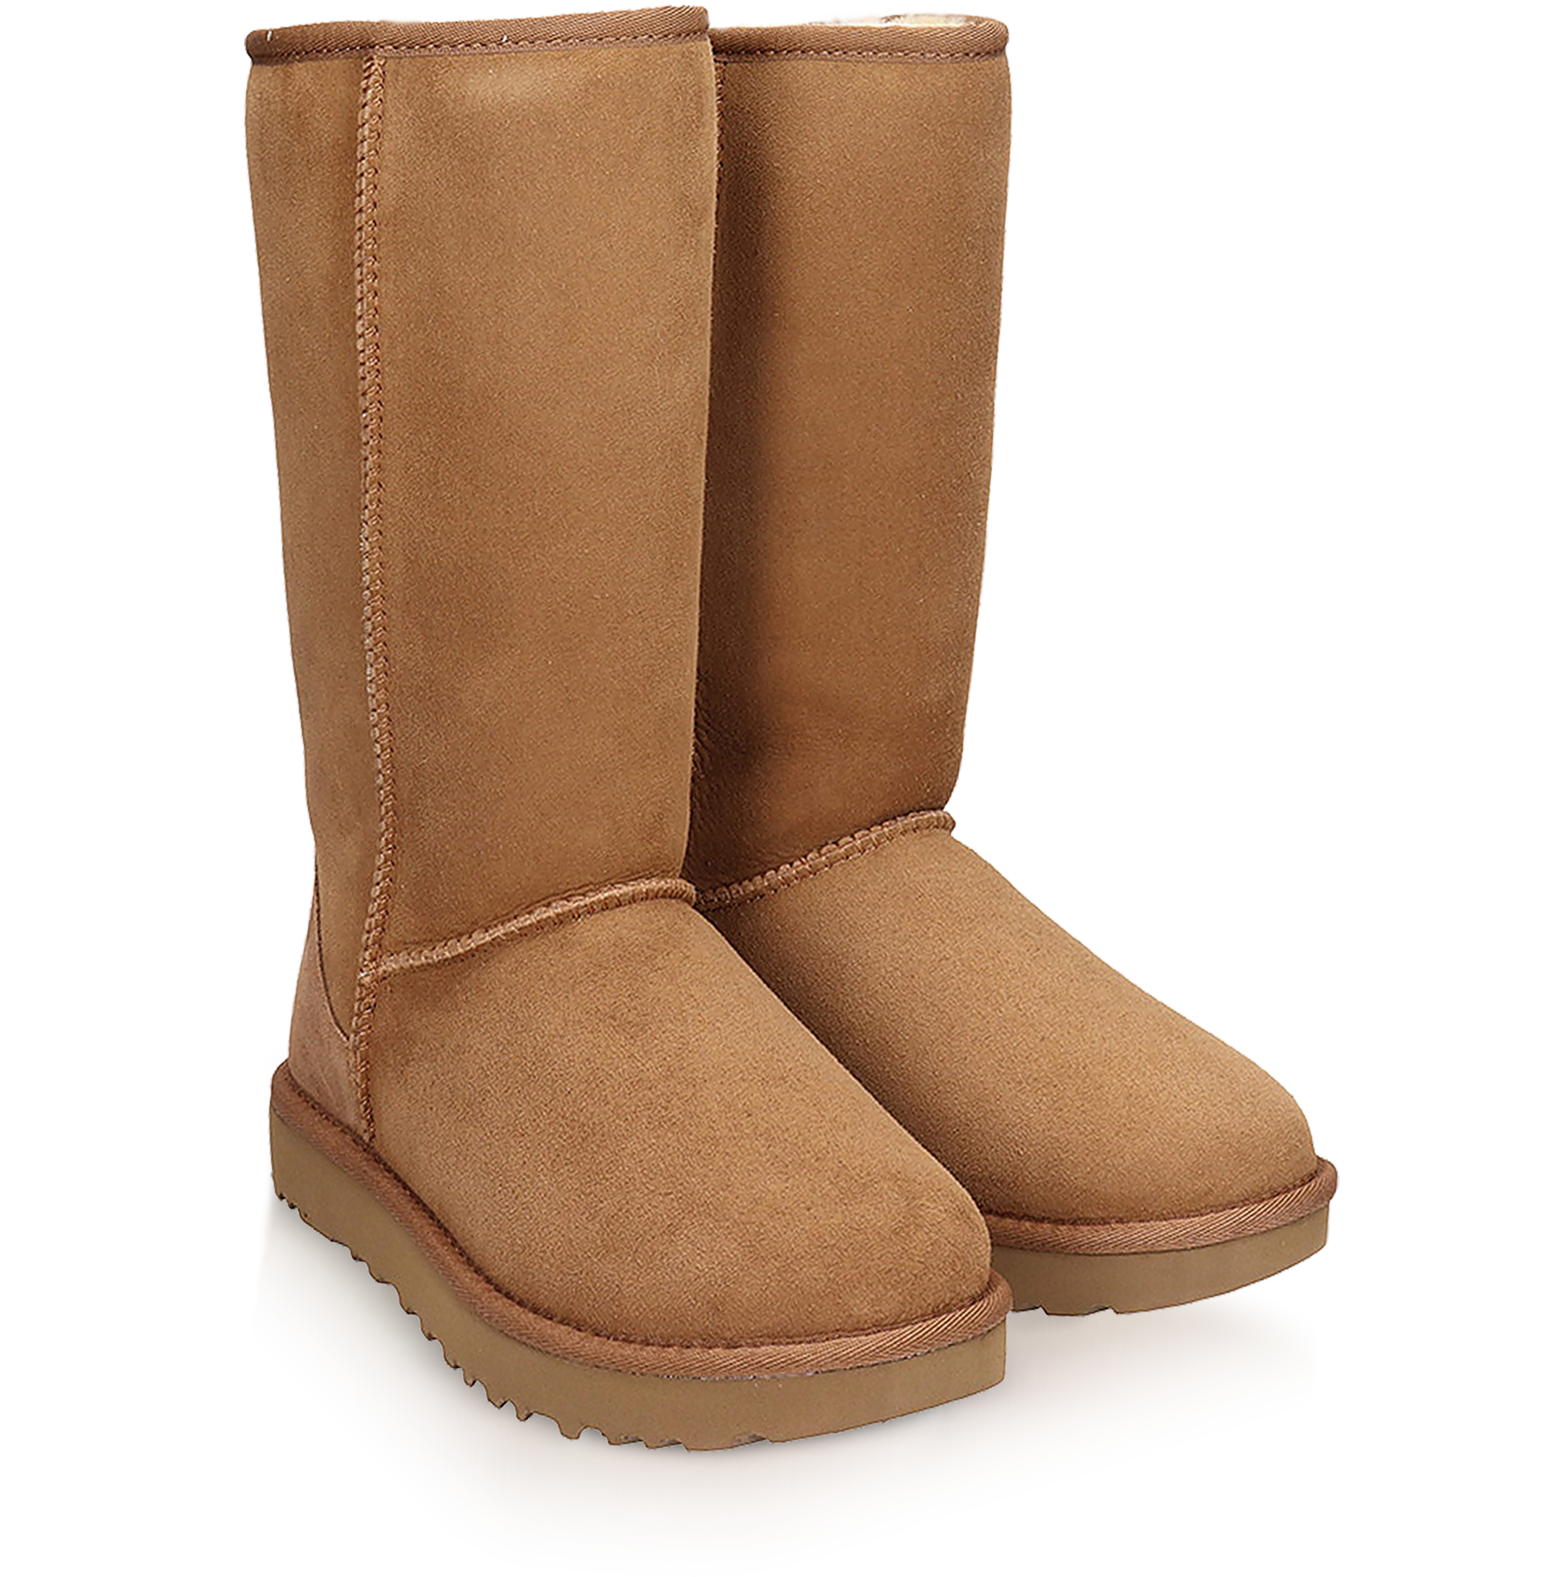 ugg boots classic tall chestnut